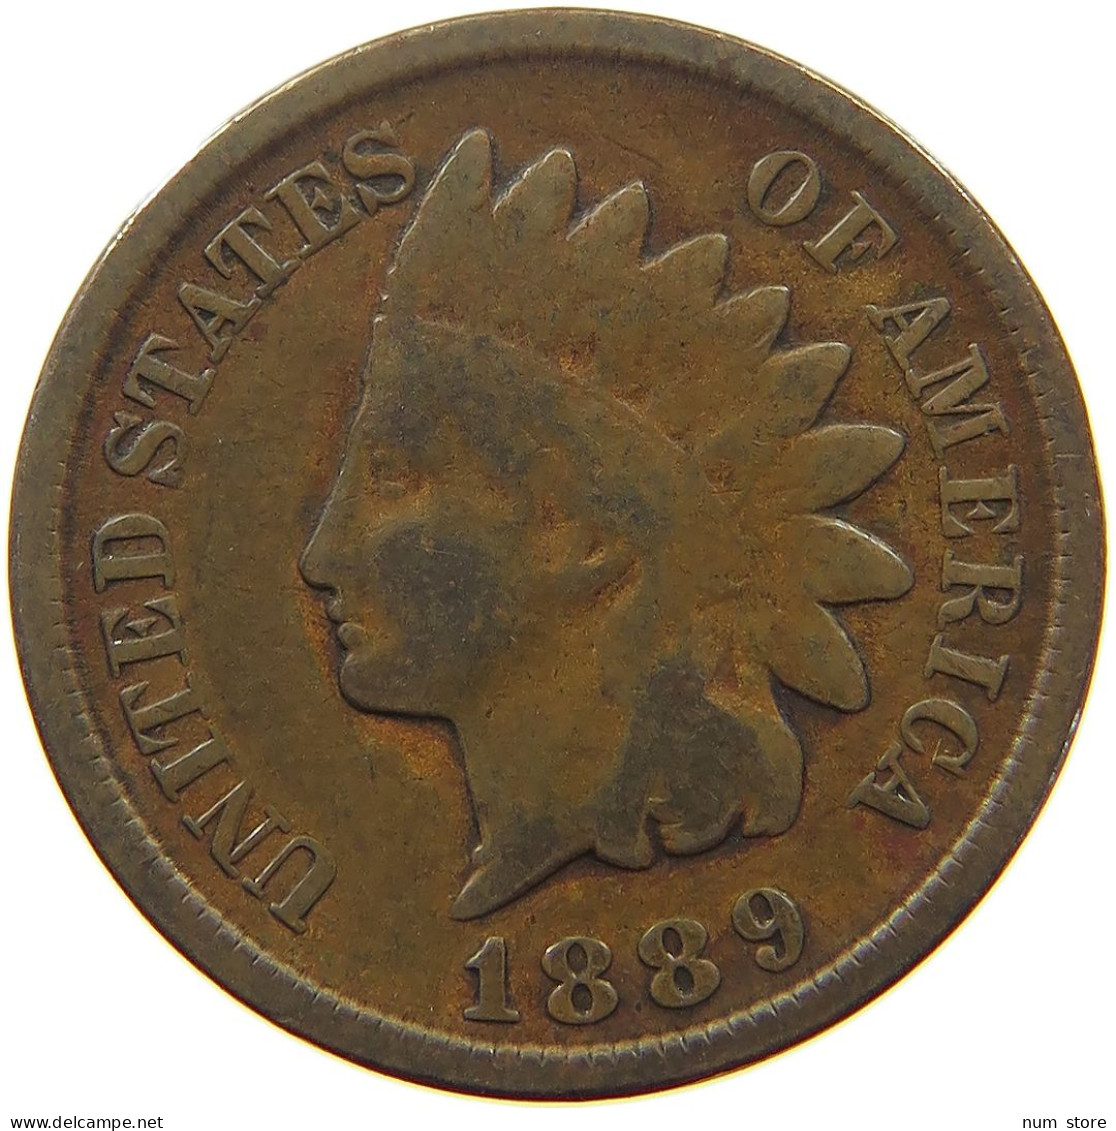 UNITED STATES OF AMERICA CENT 1889 INDIAN HEAD #a002 0557 - 1859-1909: Indian Head